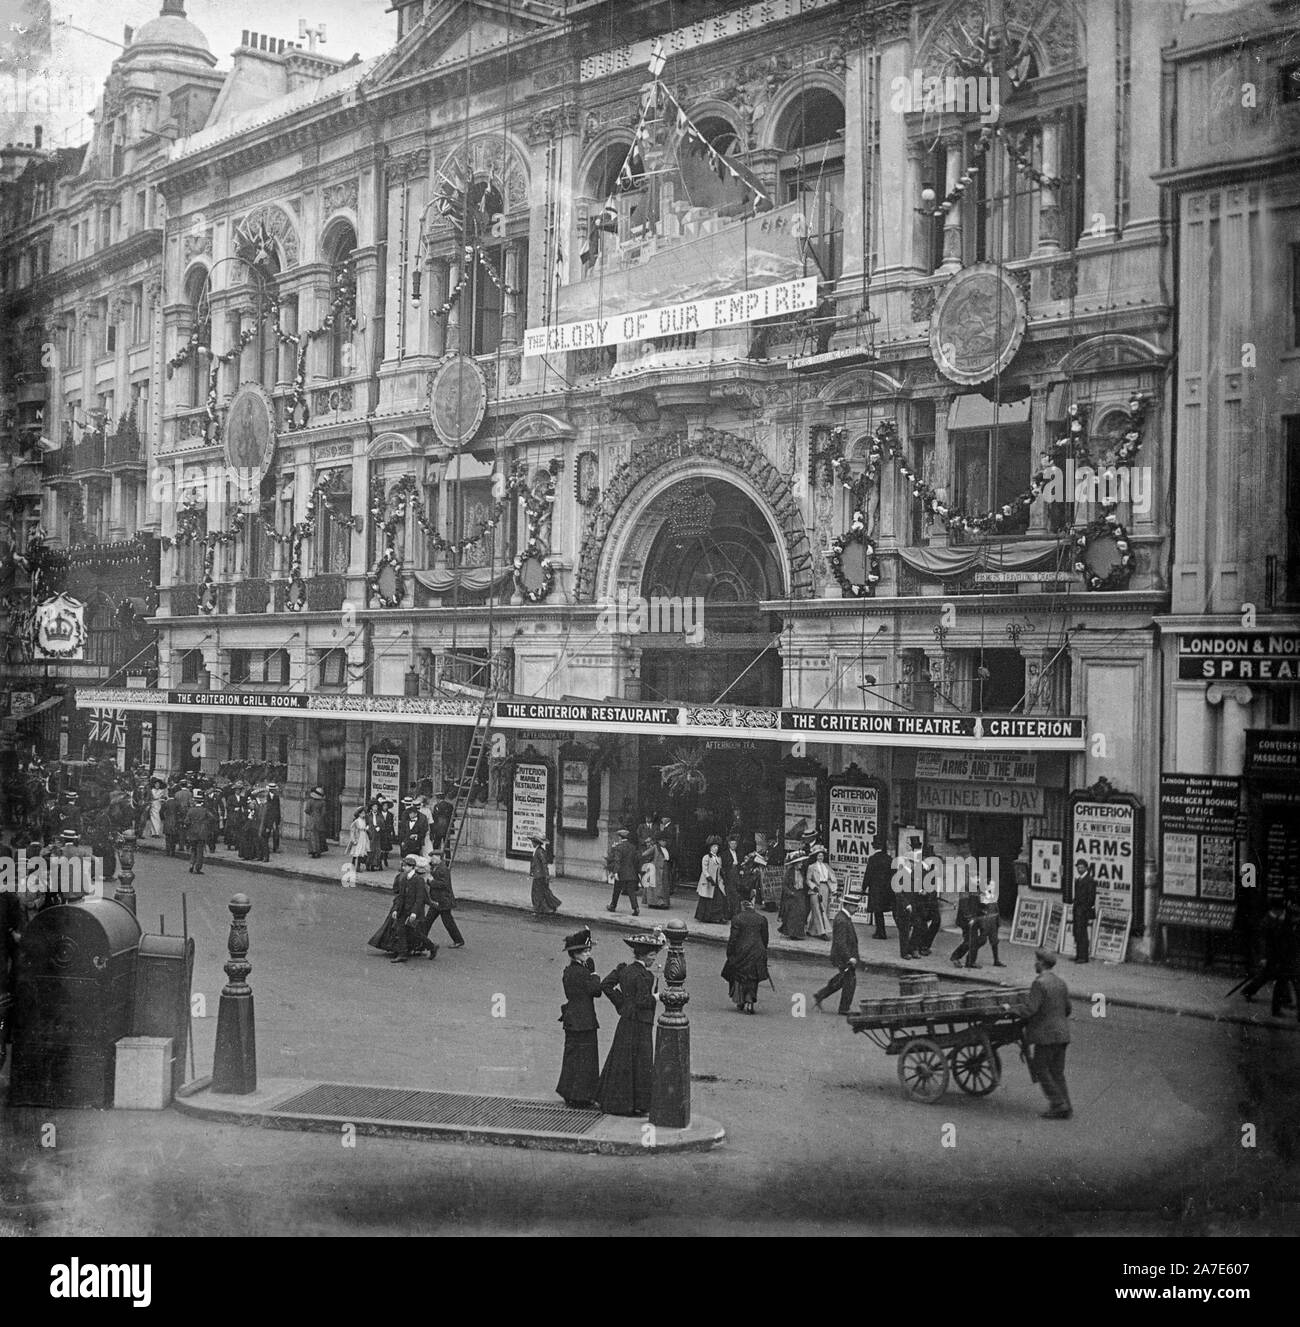 A vintage late Victorian black and white photograph showing the Criterion Theatre in Jermyn Street, London, England. The theatre is showing production of 'Arms and the Man' by Bernard Shaw. Many people are on the streets, showing typical fashion of the time. Stock Photo